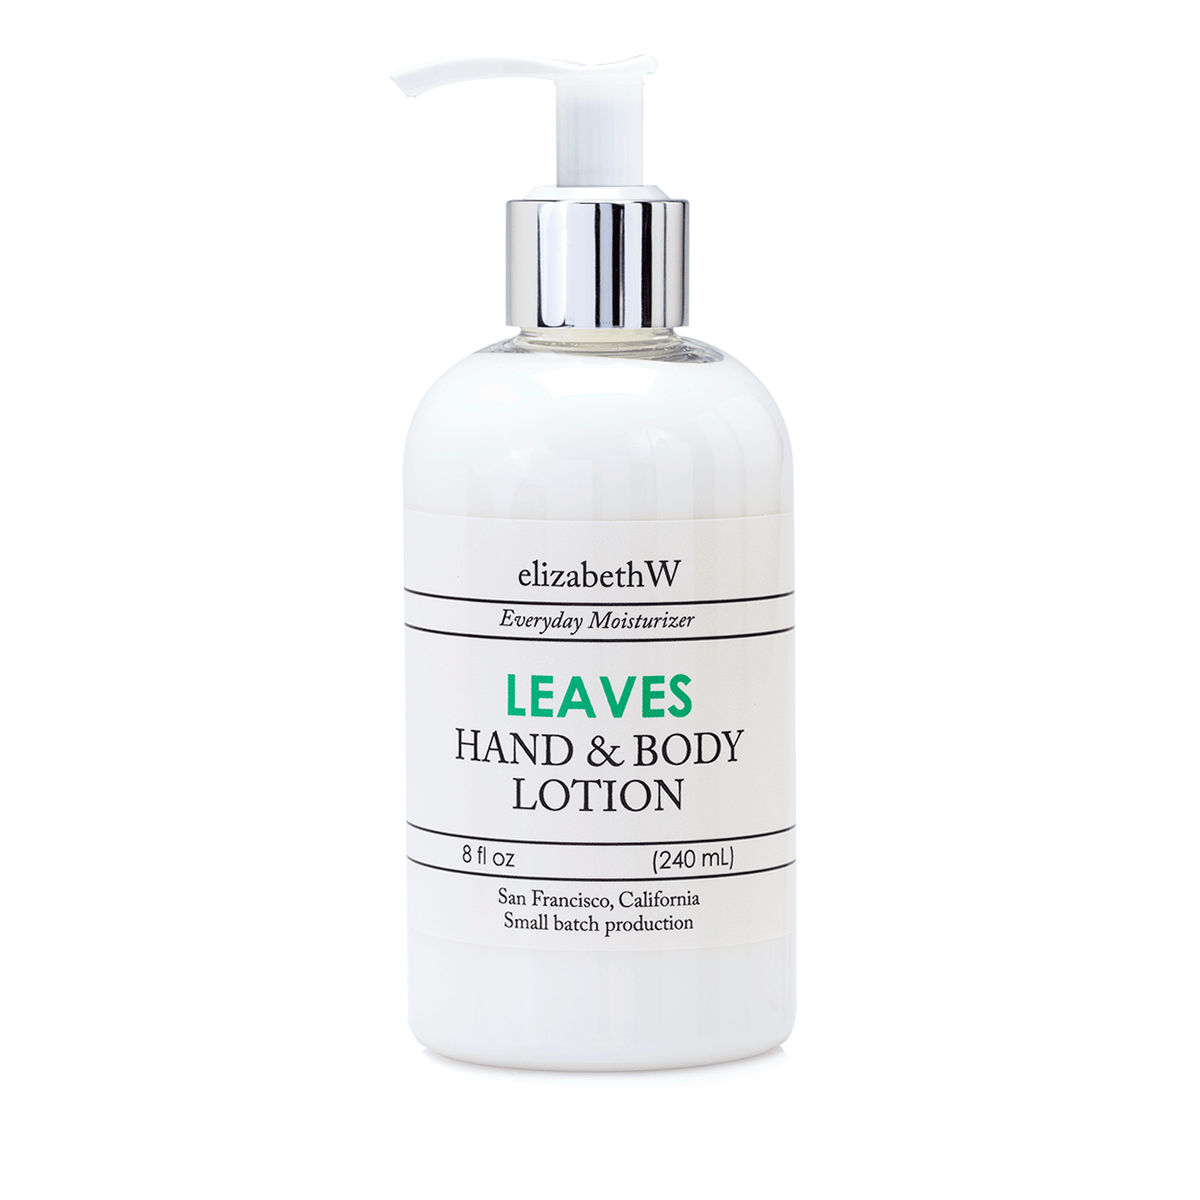 elizabeth W Small Batch Apothecary Leaves Hand & Body Lotion